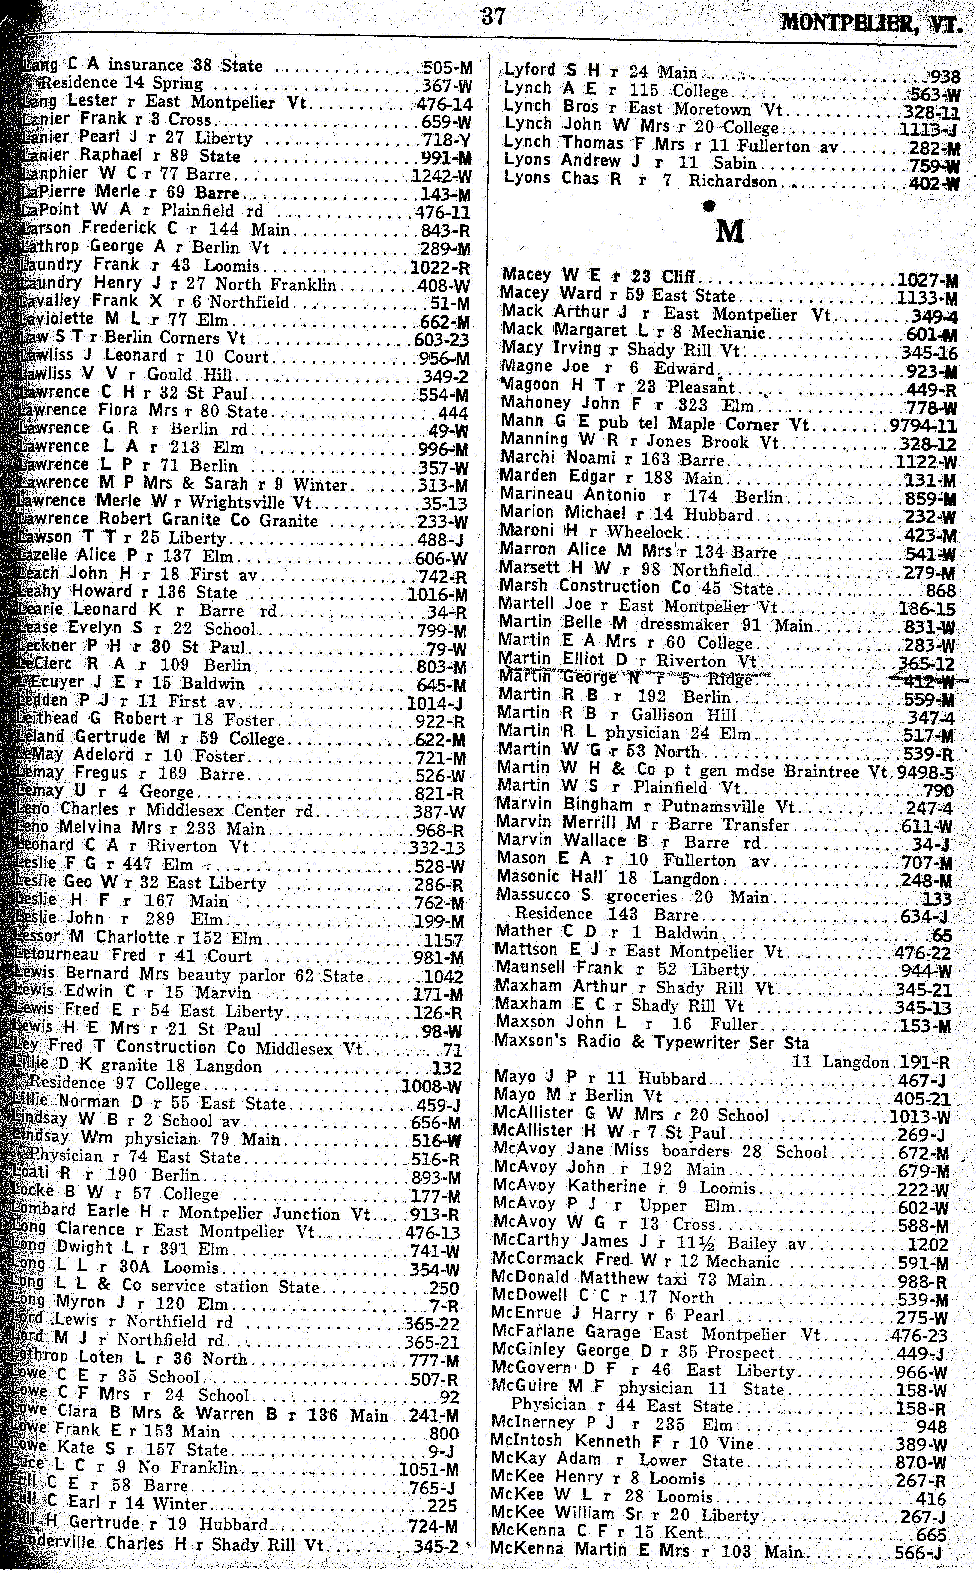 1928 Montpelier Vt Telephone Book - Page 37